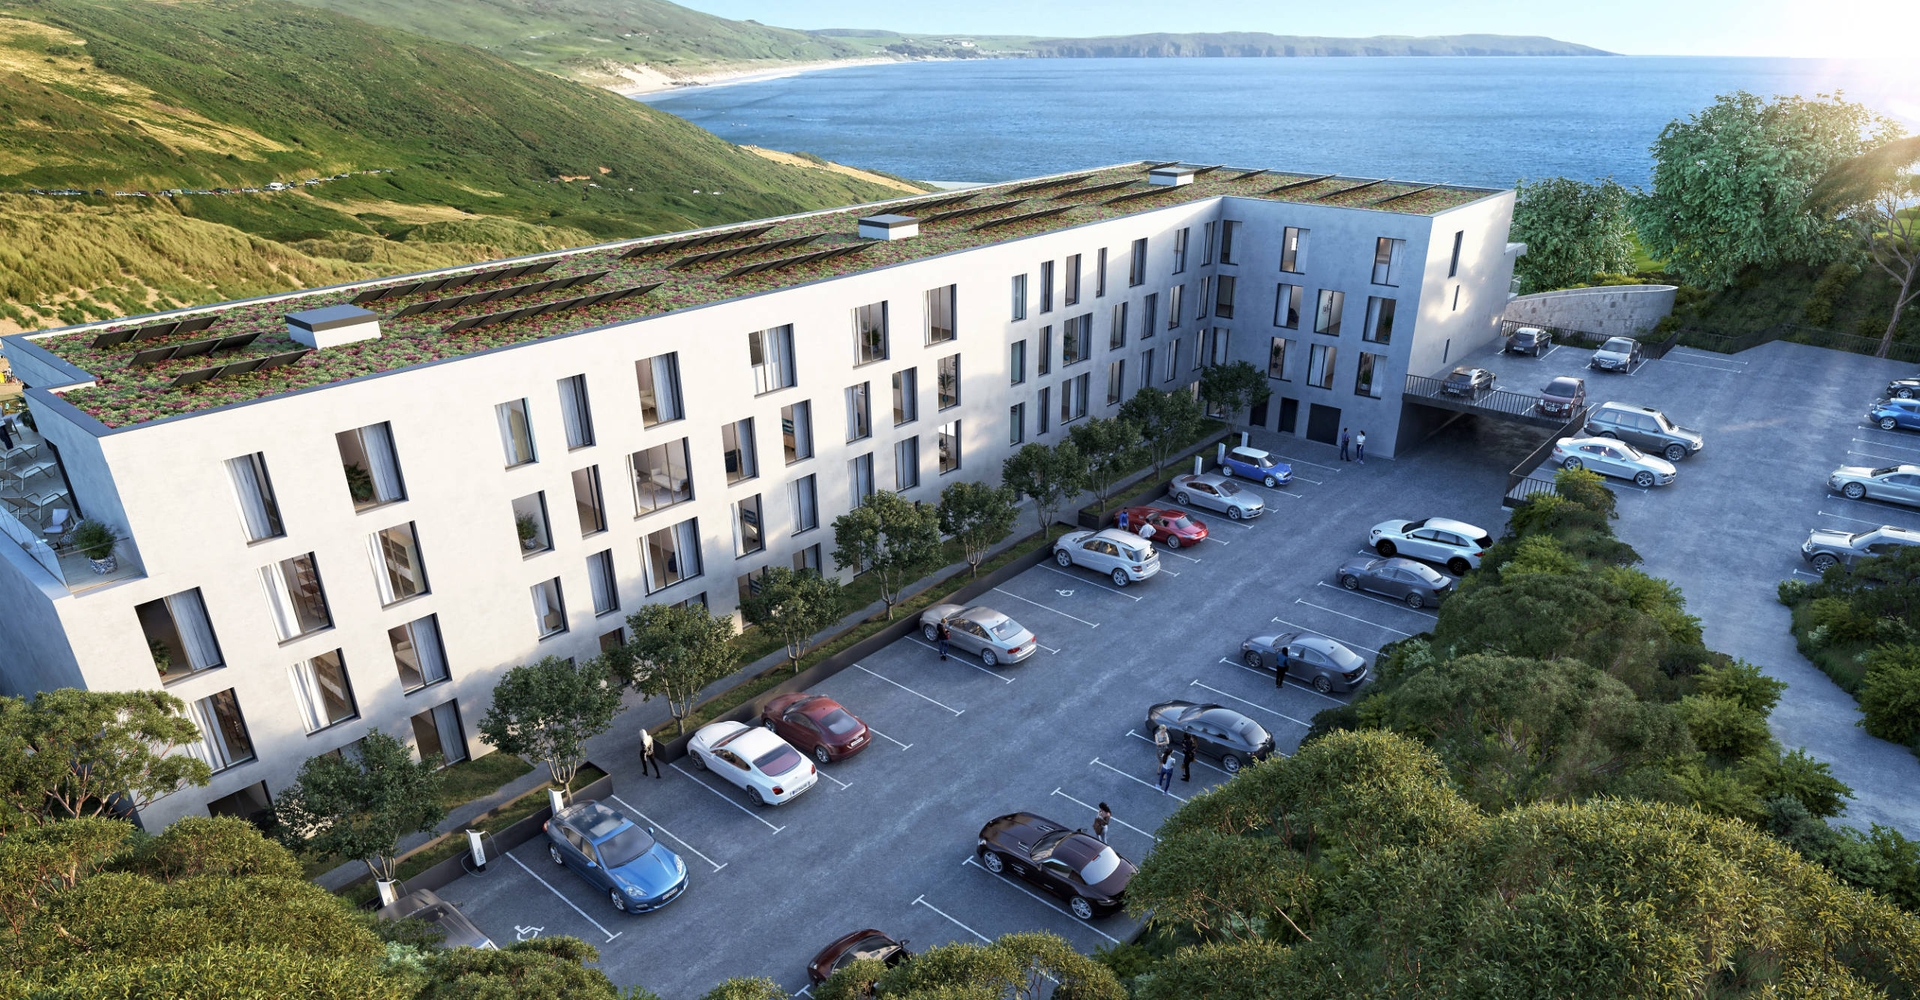 Sustainable construction and development main image - showing a new development overlooking the sea